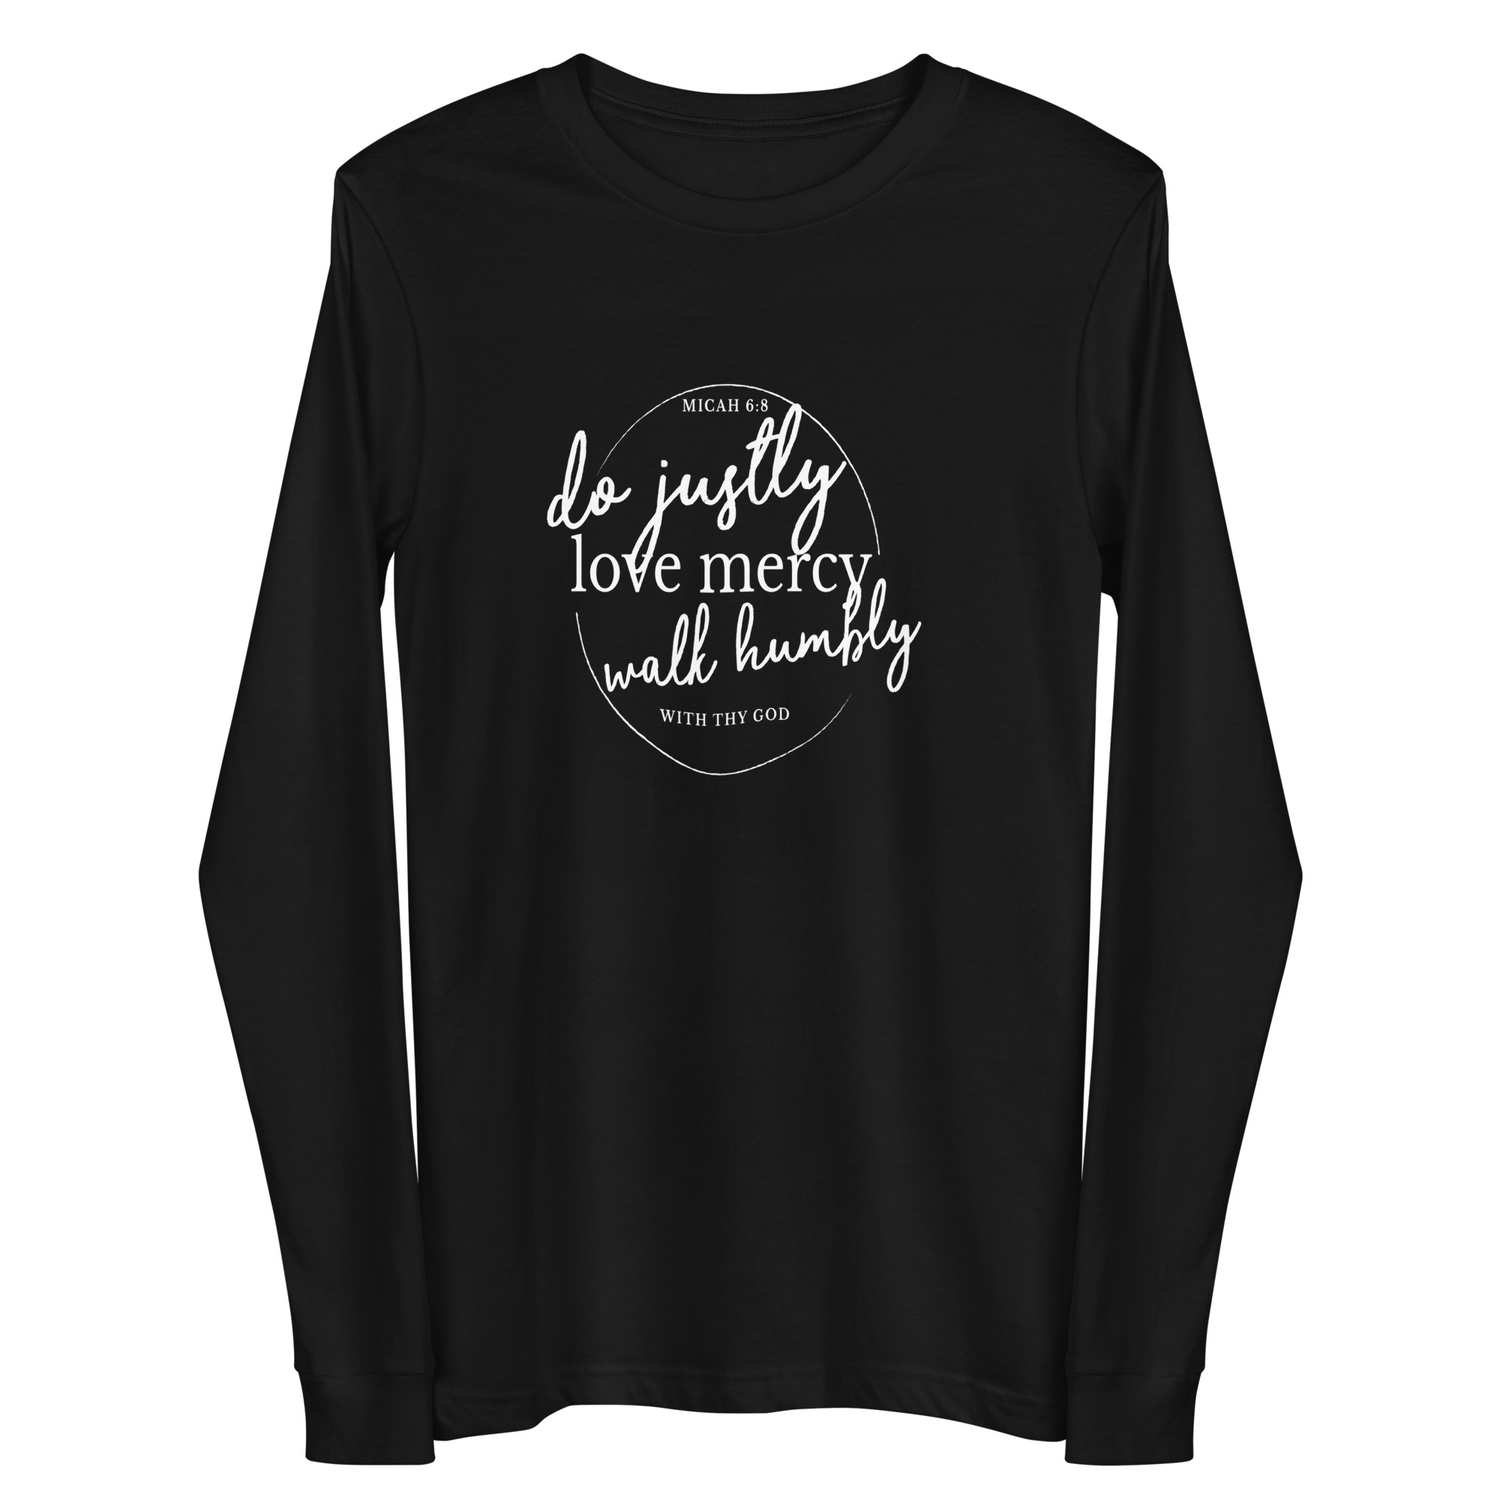 Long sleeve shirt with 1 Thessolonians 5:17